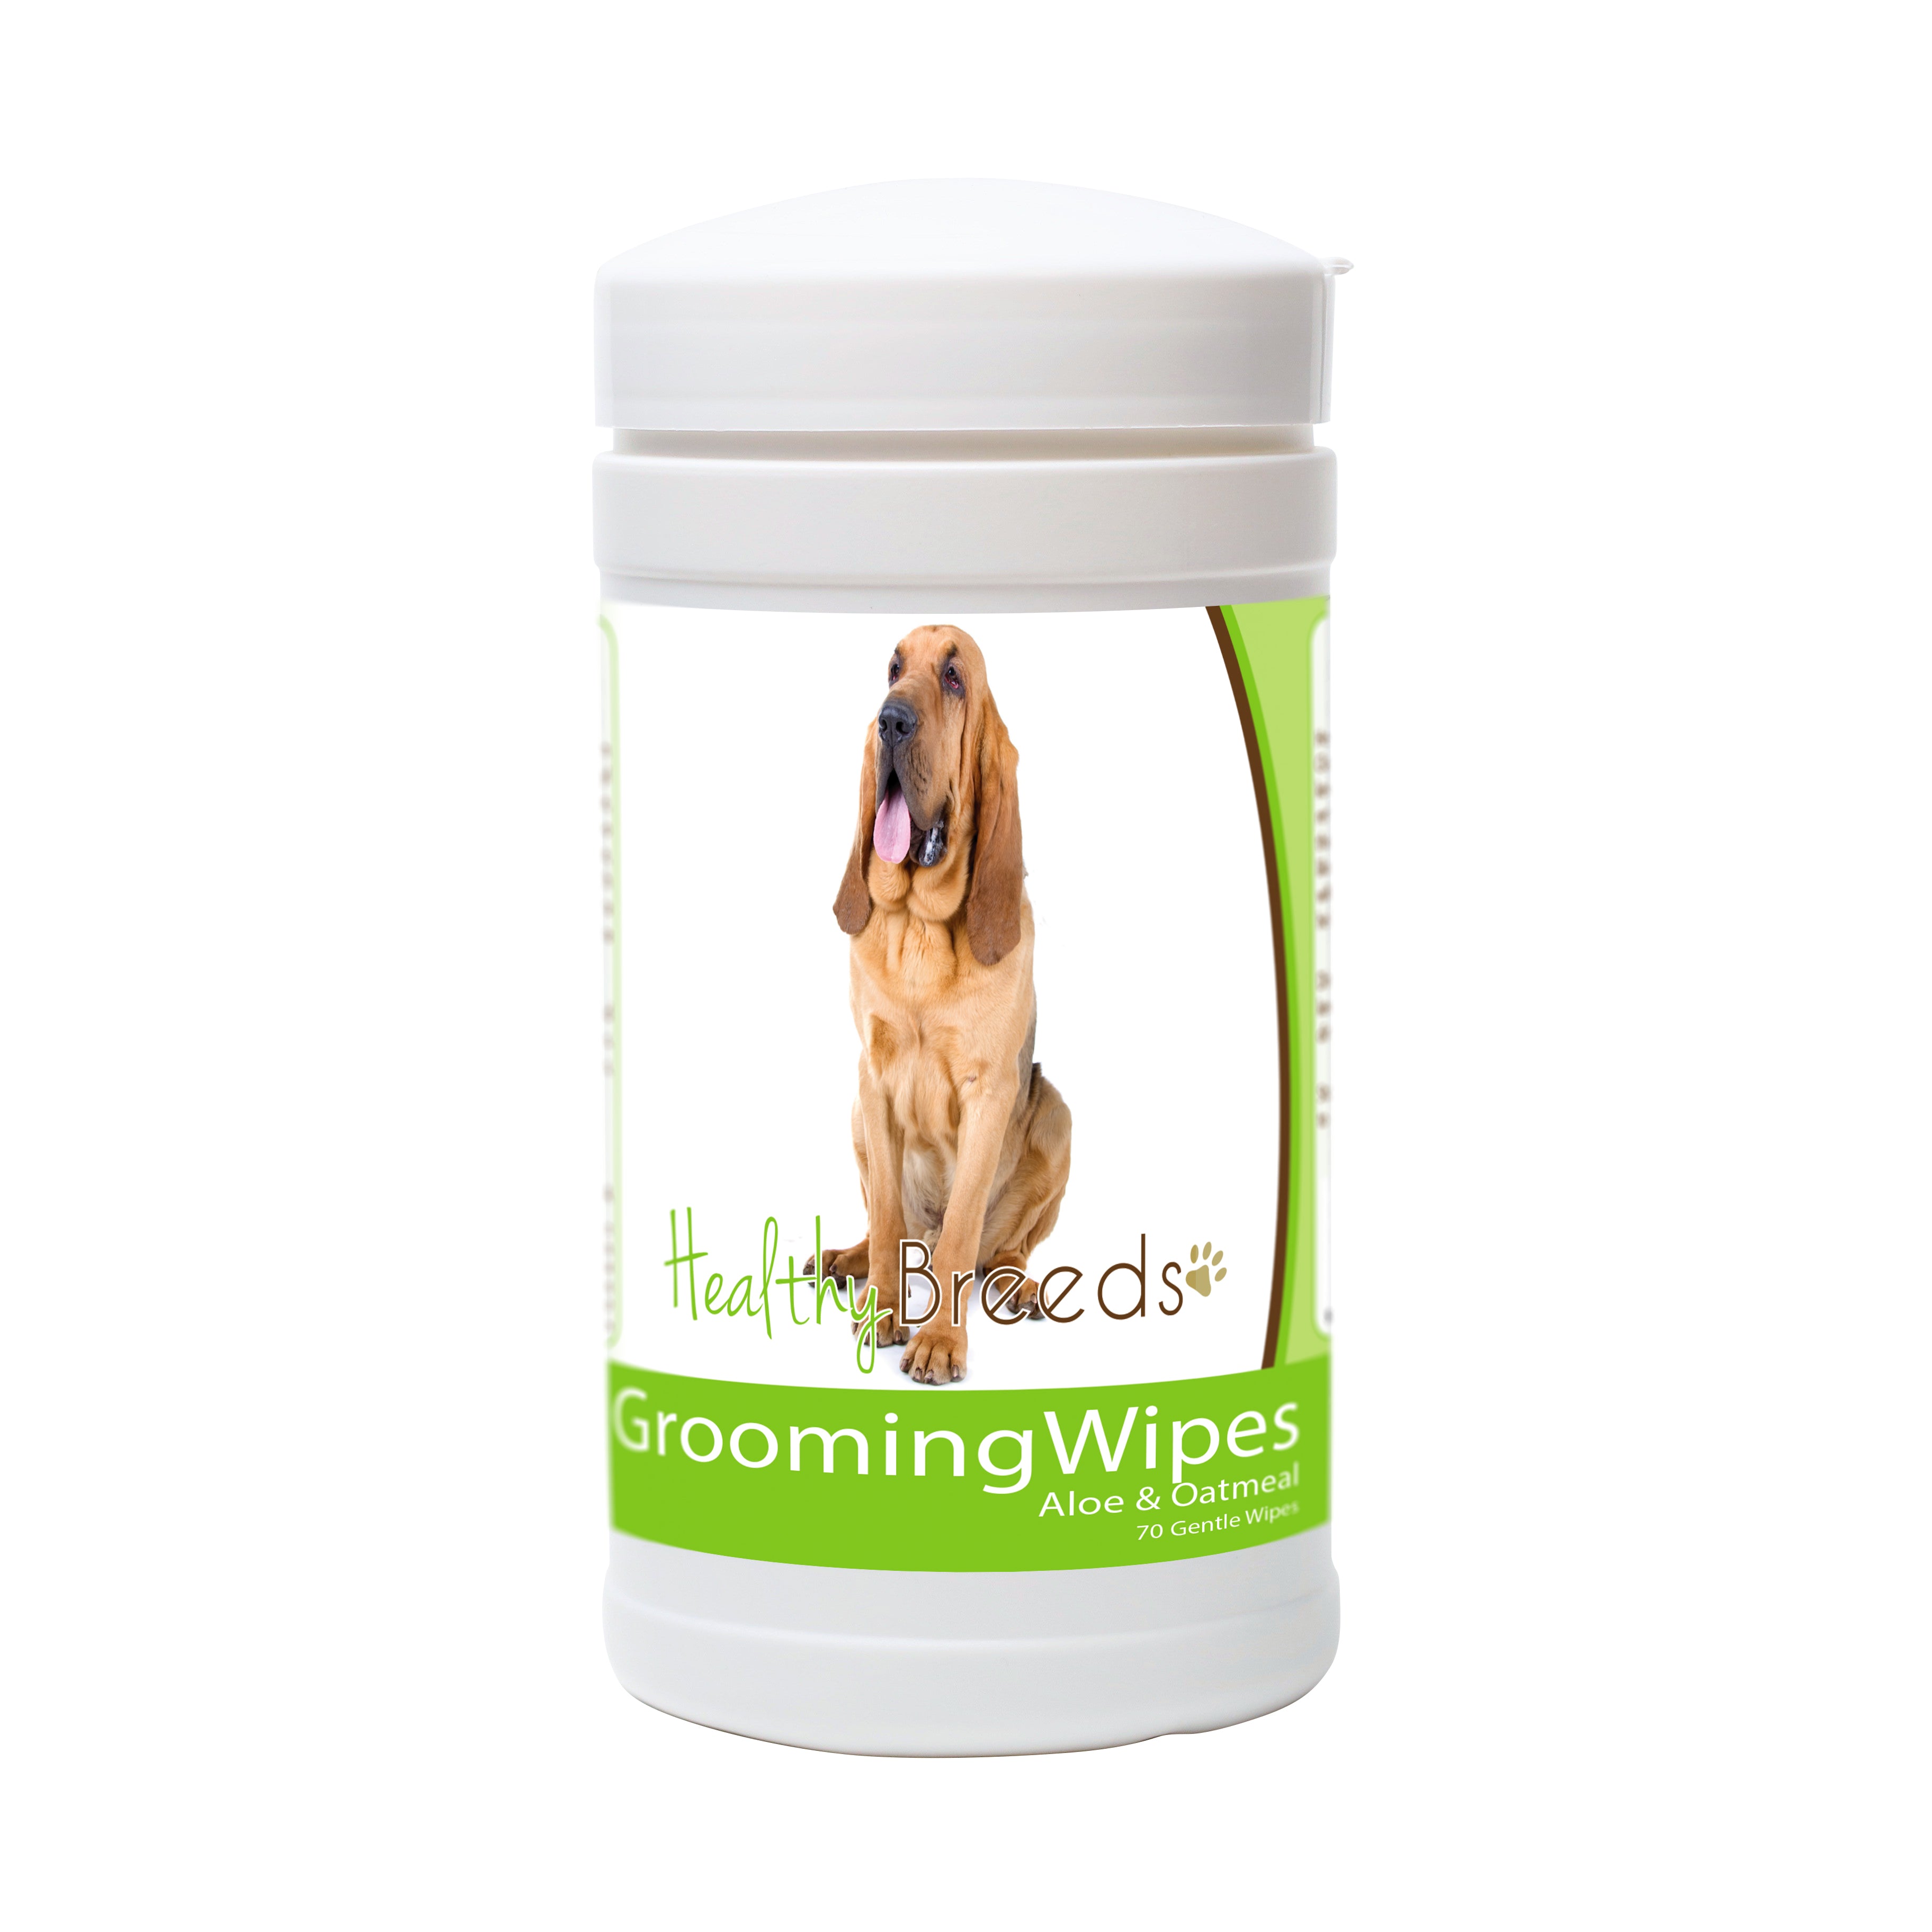 Bloodhound Grooming Wipes 70 Count